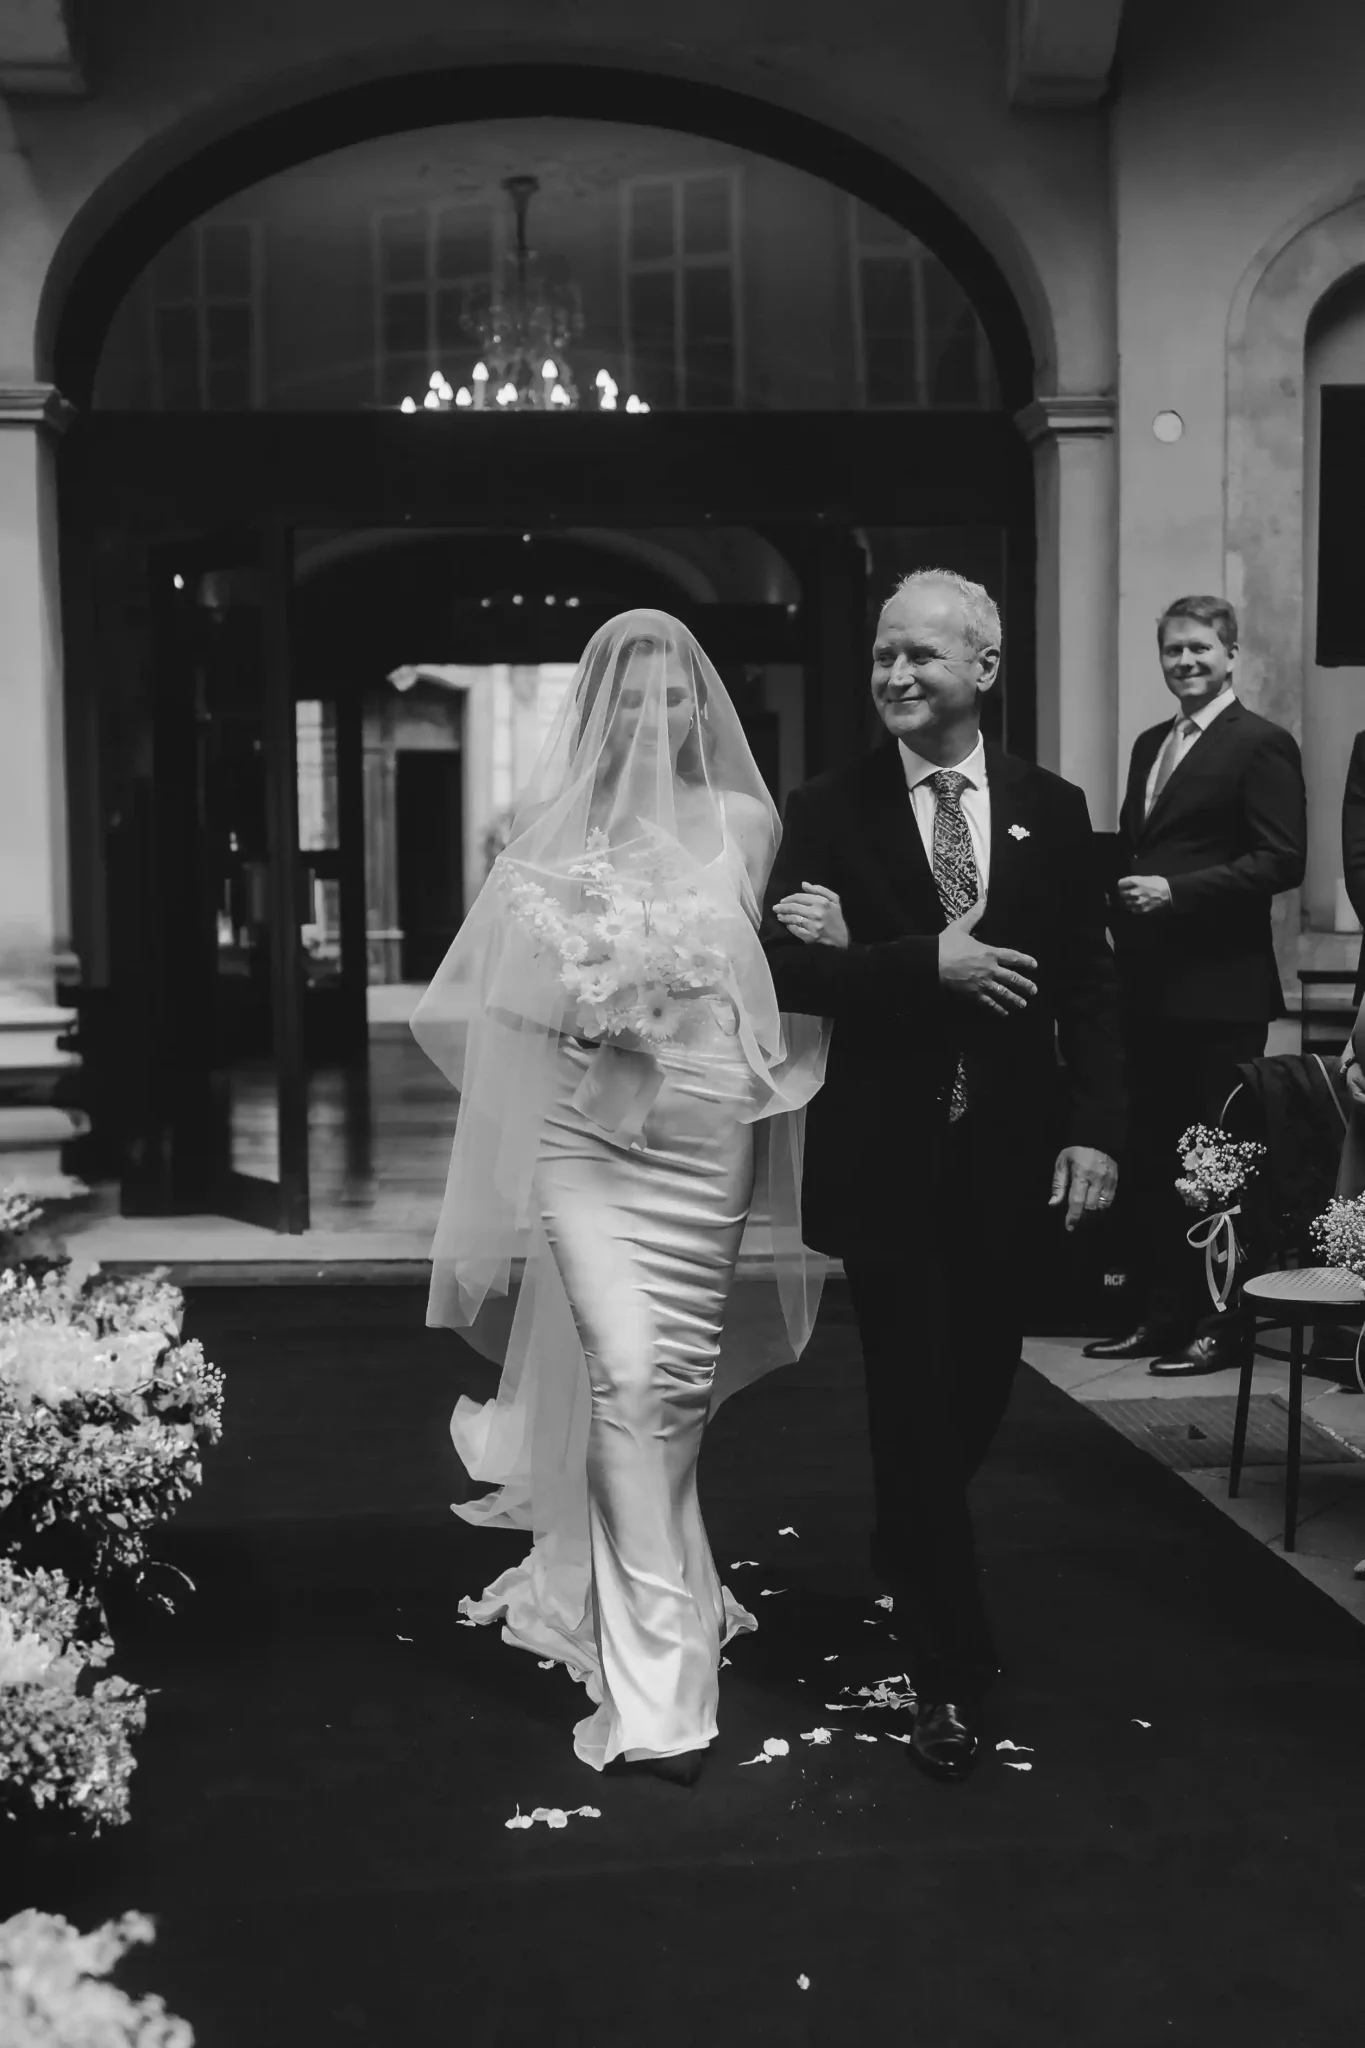 A bride walking down the aisle with her father.